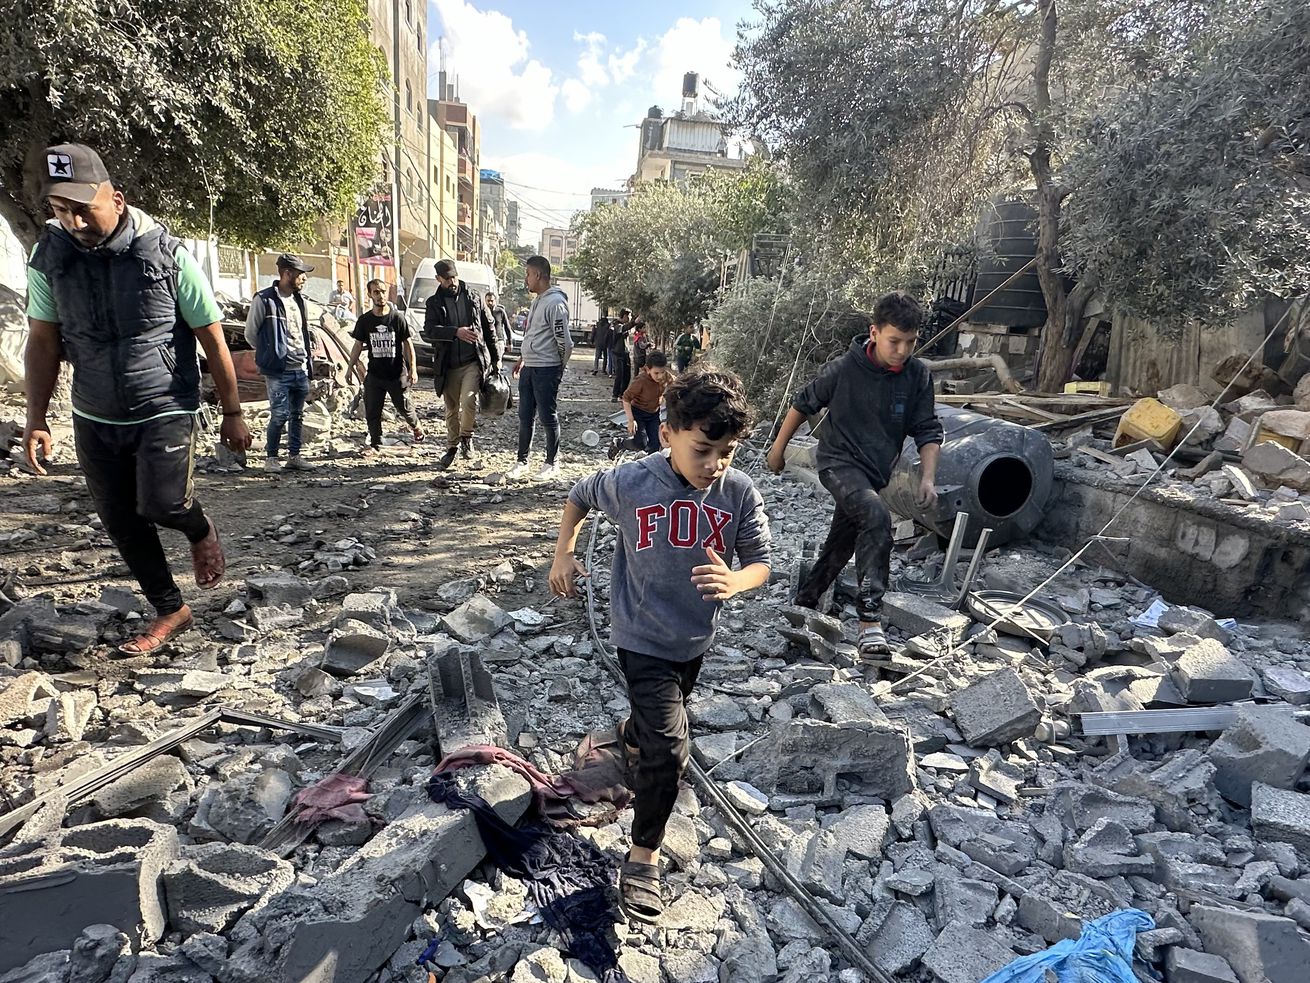 People walking through bombed building rubble looking for survivors.